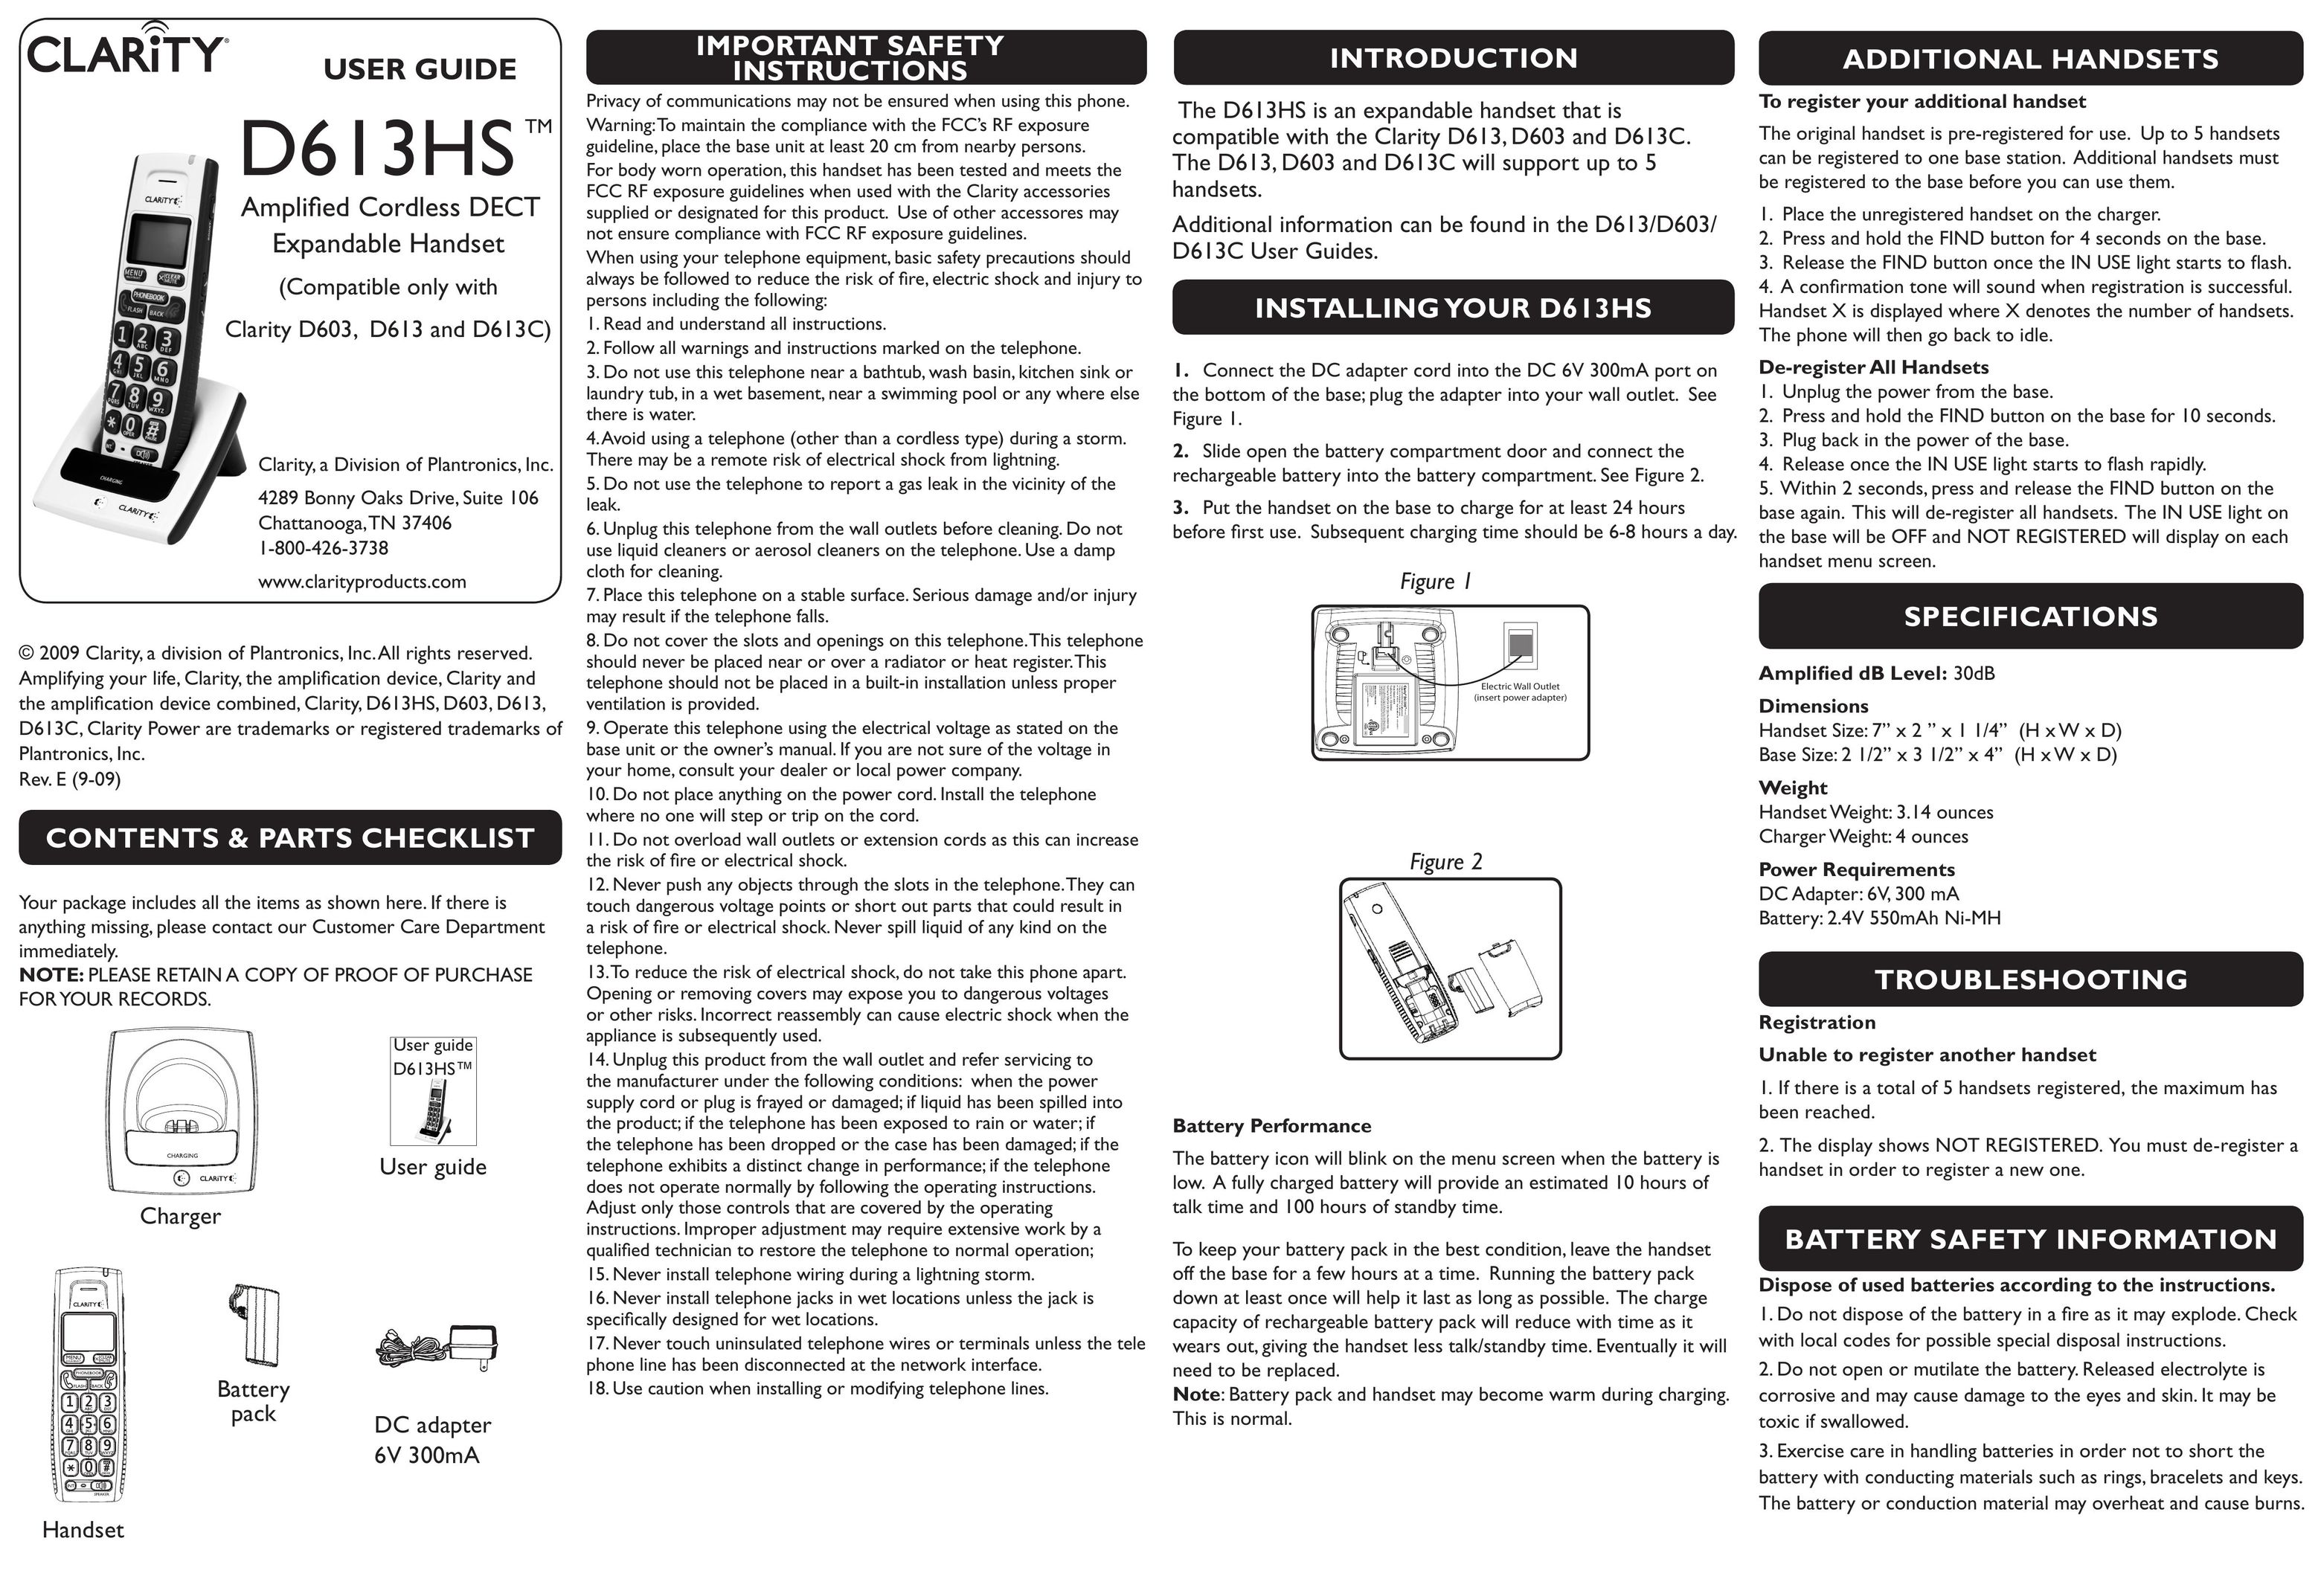 Clarity D613HS Cordless Telephone User Manual